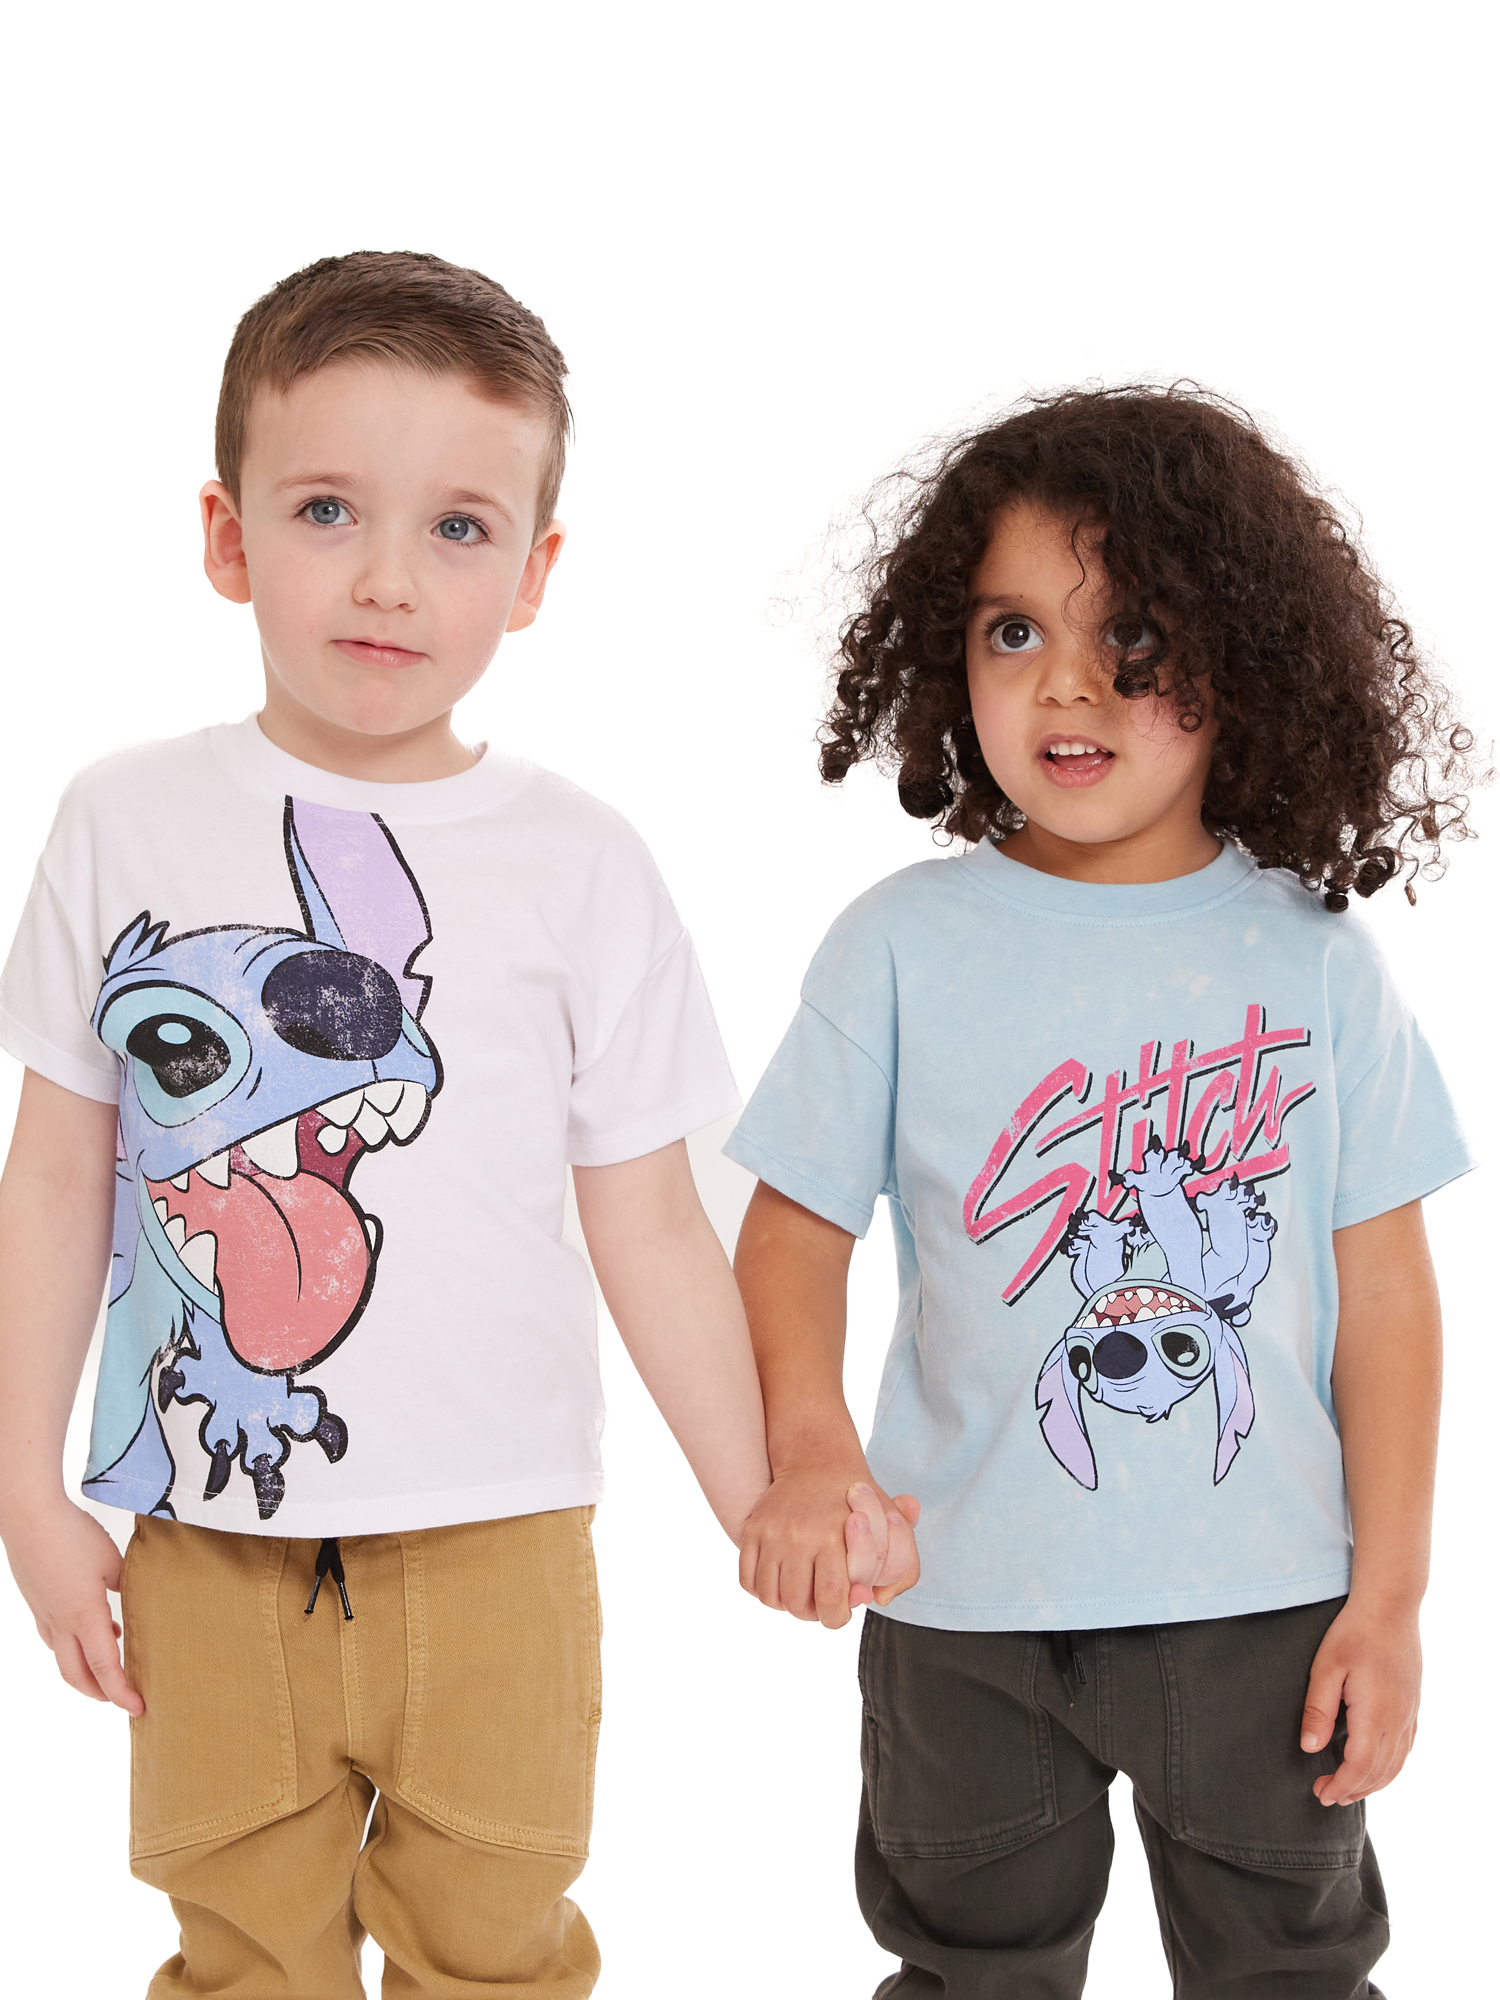 Stitch Toddler Boy Graphic Tees, 2-Pack, Sizes 2T-5T - image 2 of 8